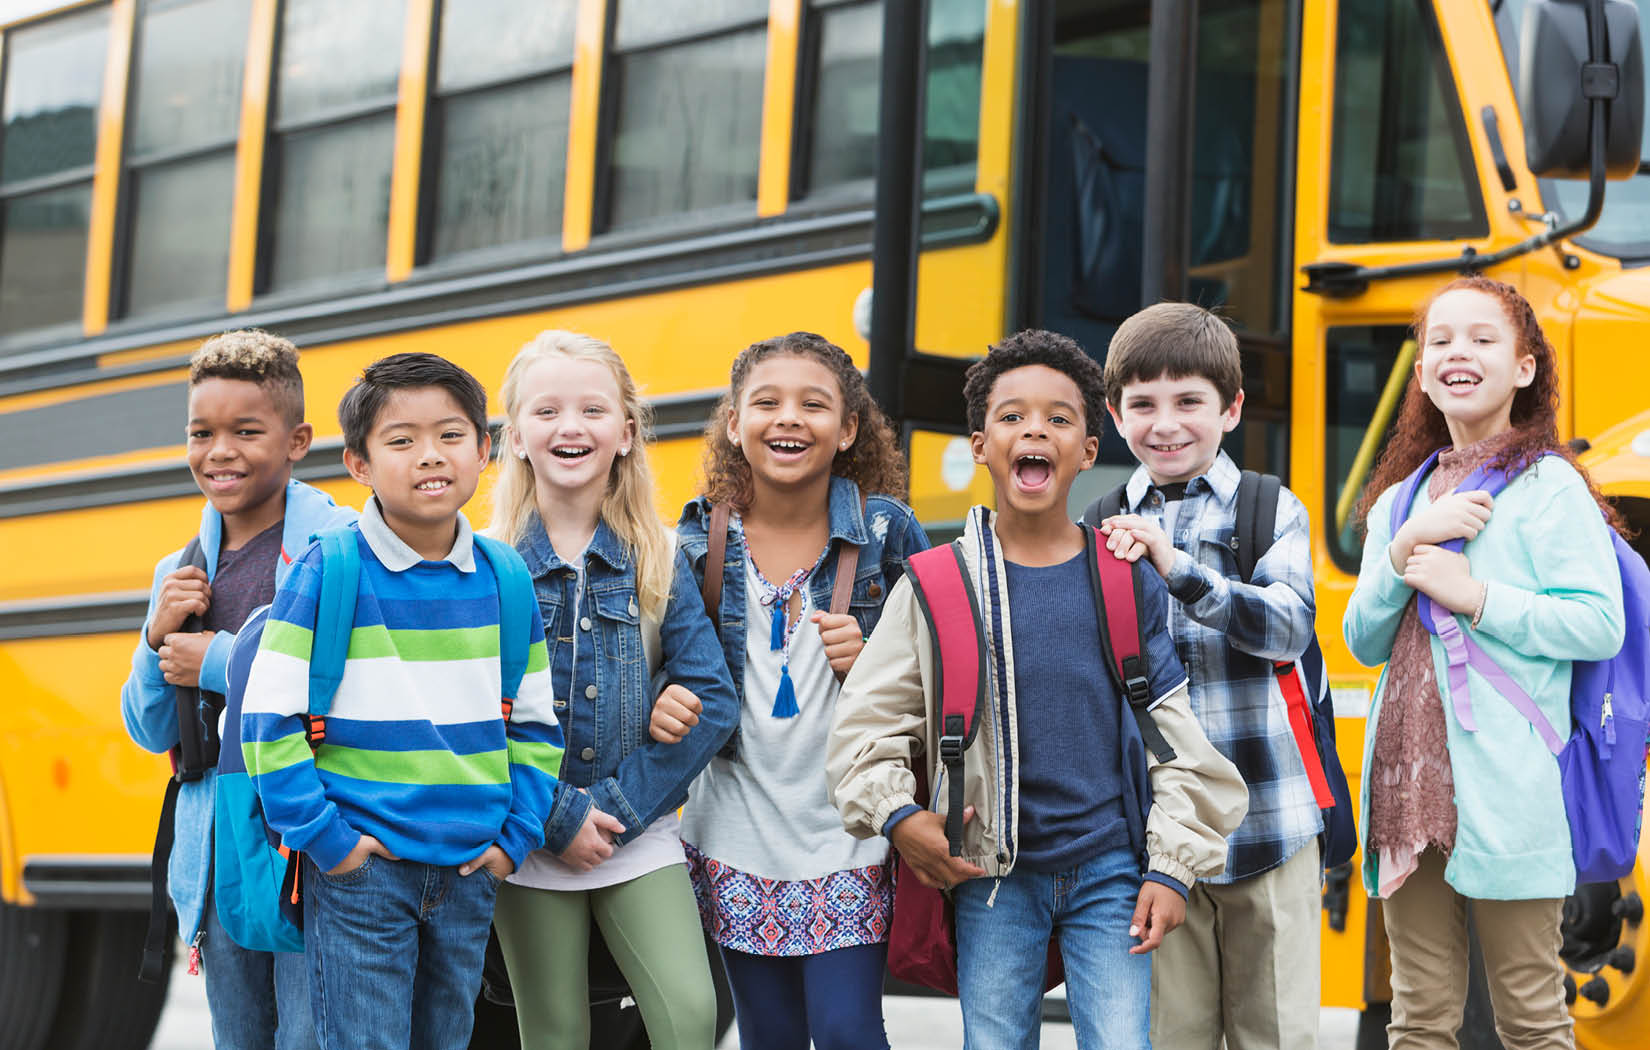 A group of kids standing in front of a school bus.